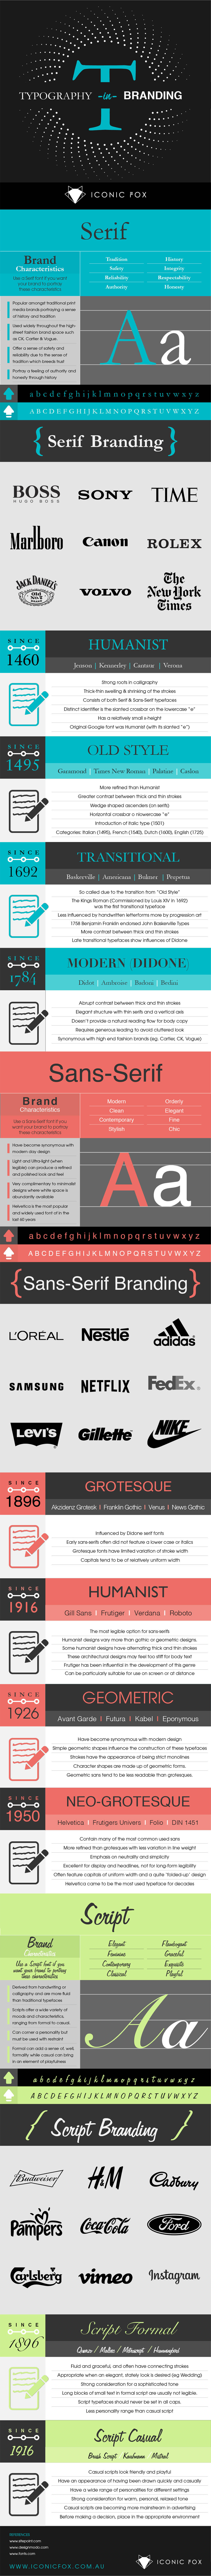 Typography in Branding - How To Choose The Right Font For Your Brand